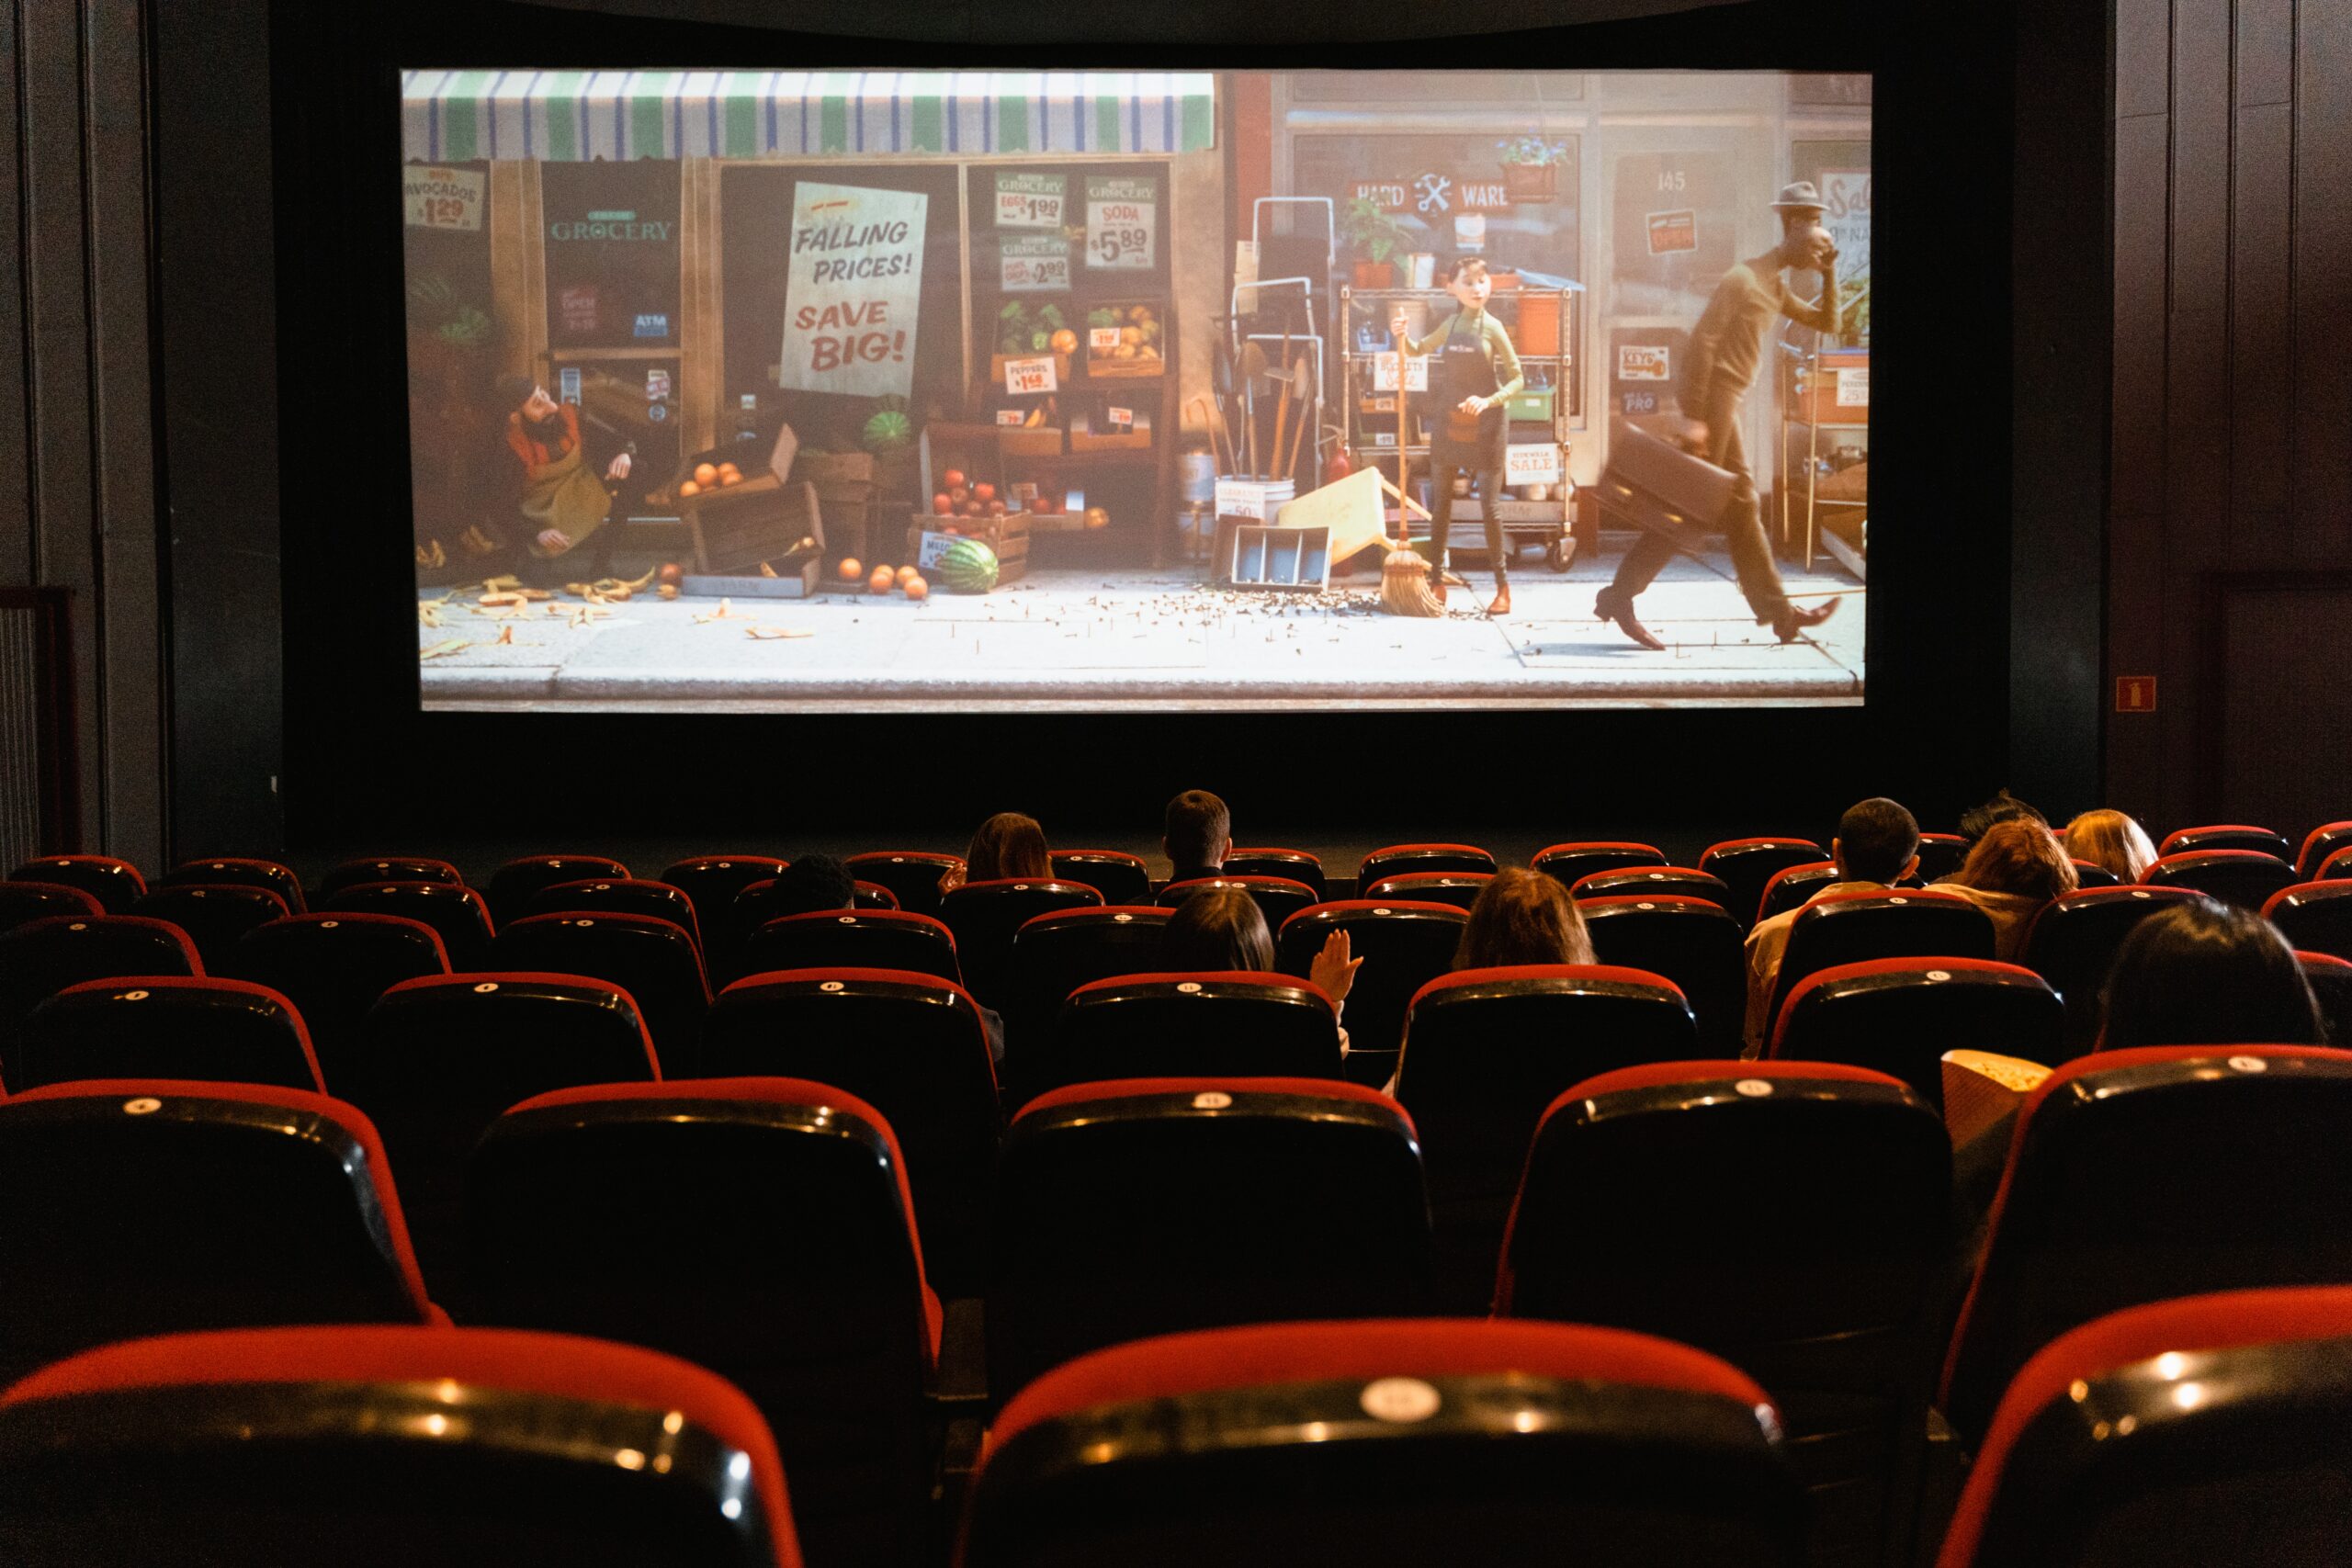 An image of.a movie theatre. Photo by: Pexels.com